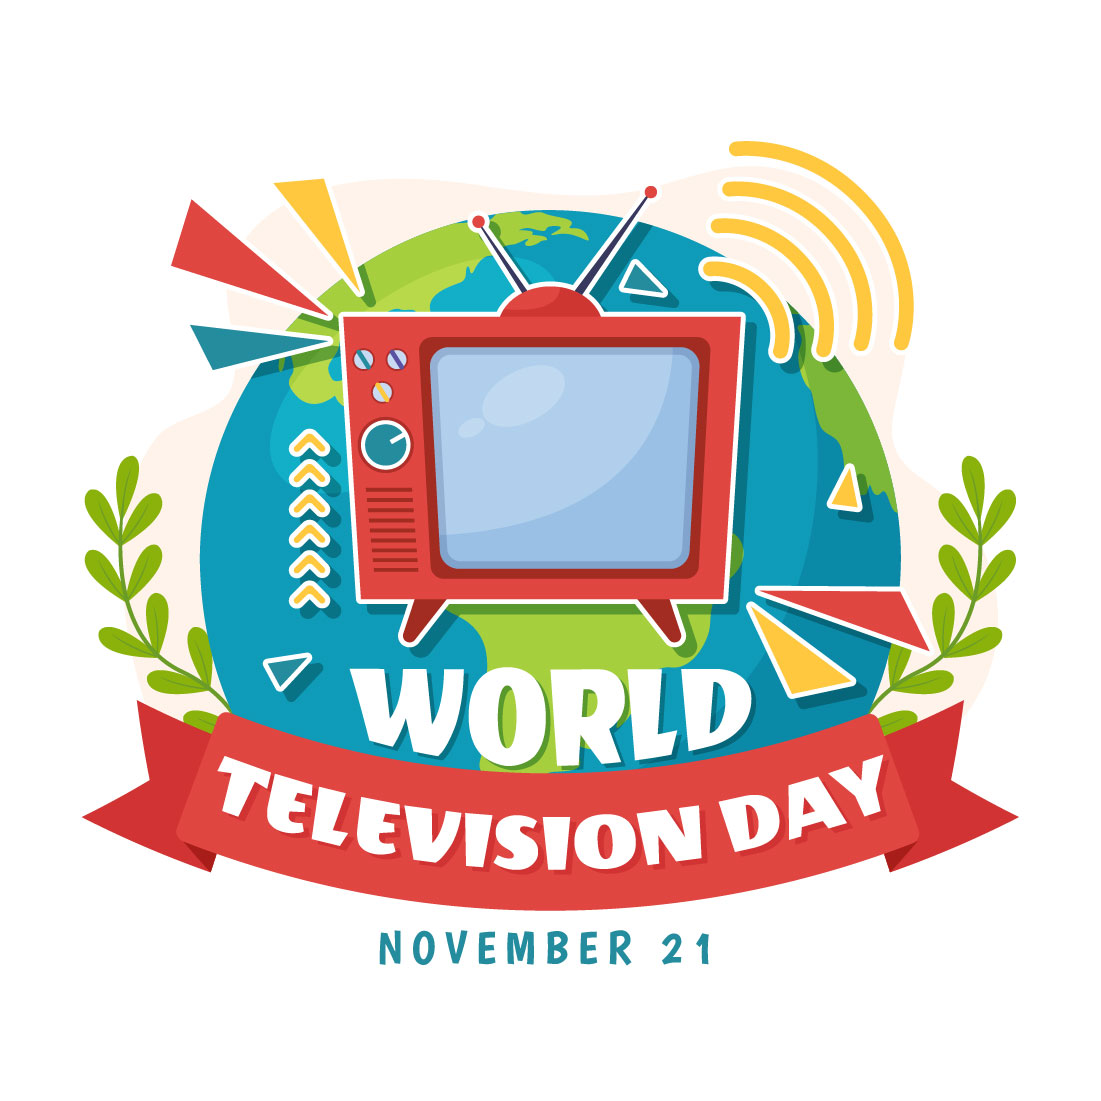 15 World Television Day Illustration cover image.